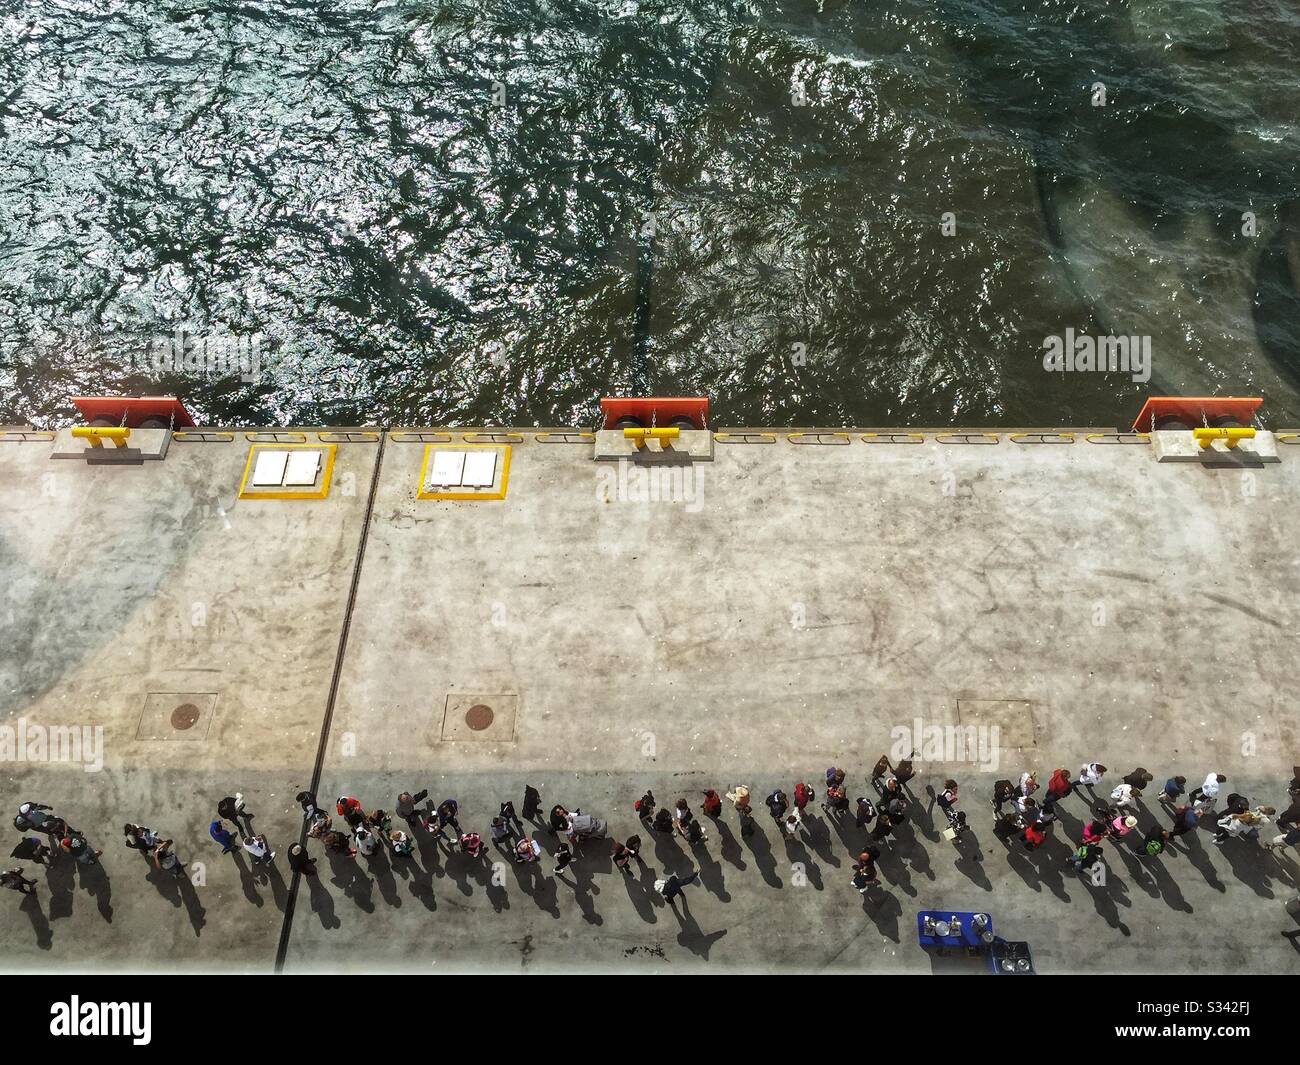 Looking down on large line of cruise ship passengers waiting to board ship. Stock Photo